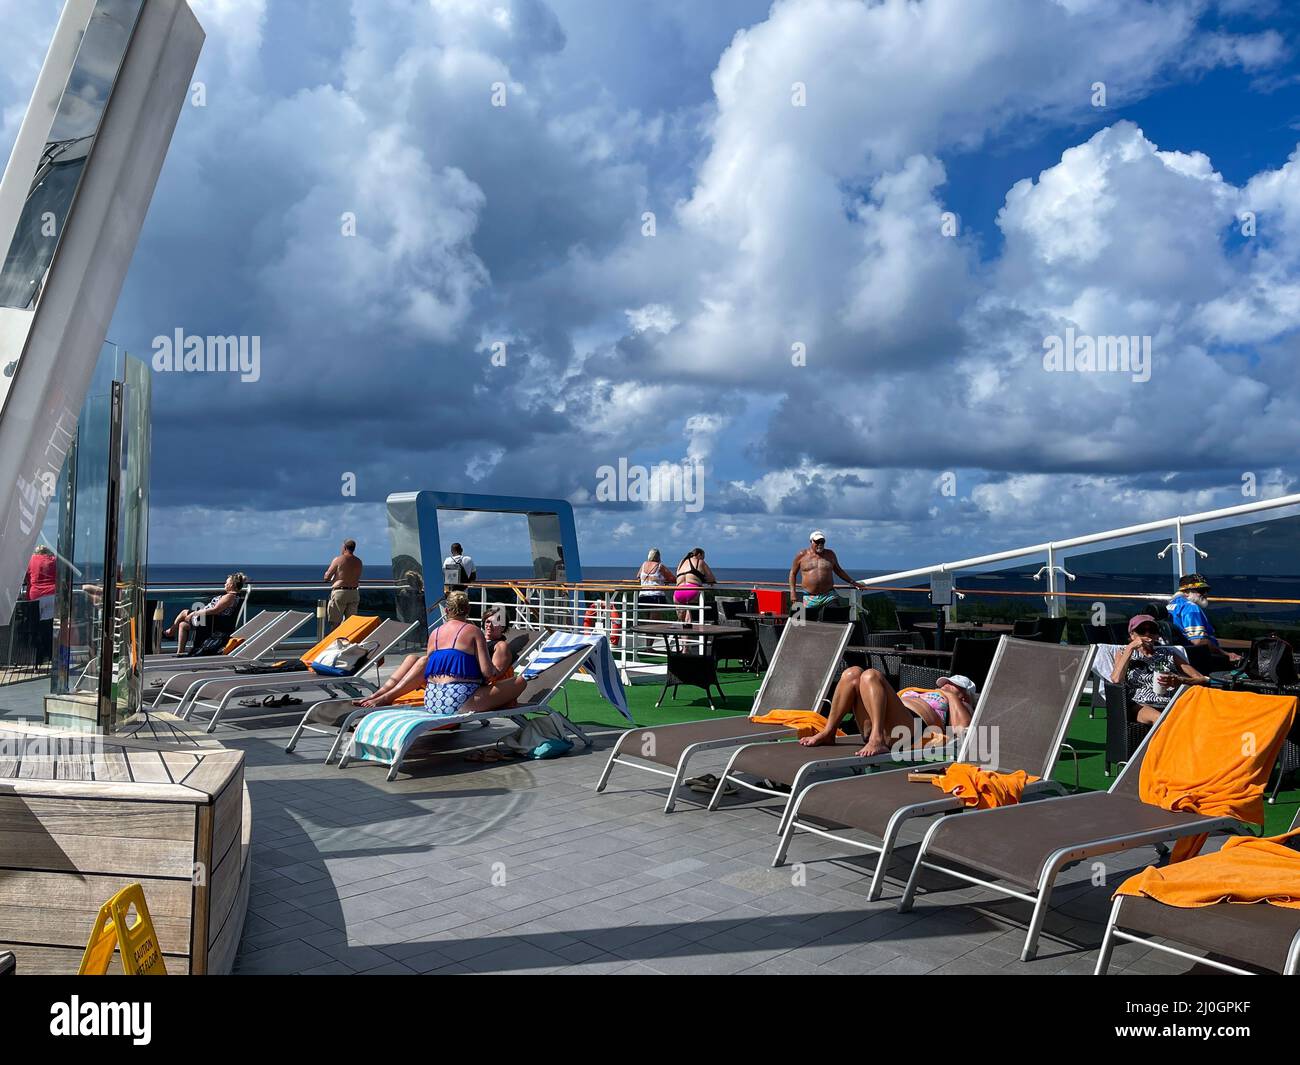 Orlando, FL USA - October 11, 2021:  The quiet adult swimming pool area on the MSC Cruise Ship Divina in Port Canaveral, Florida., Stock Photo